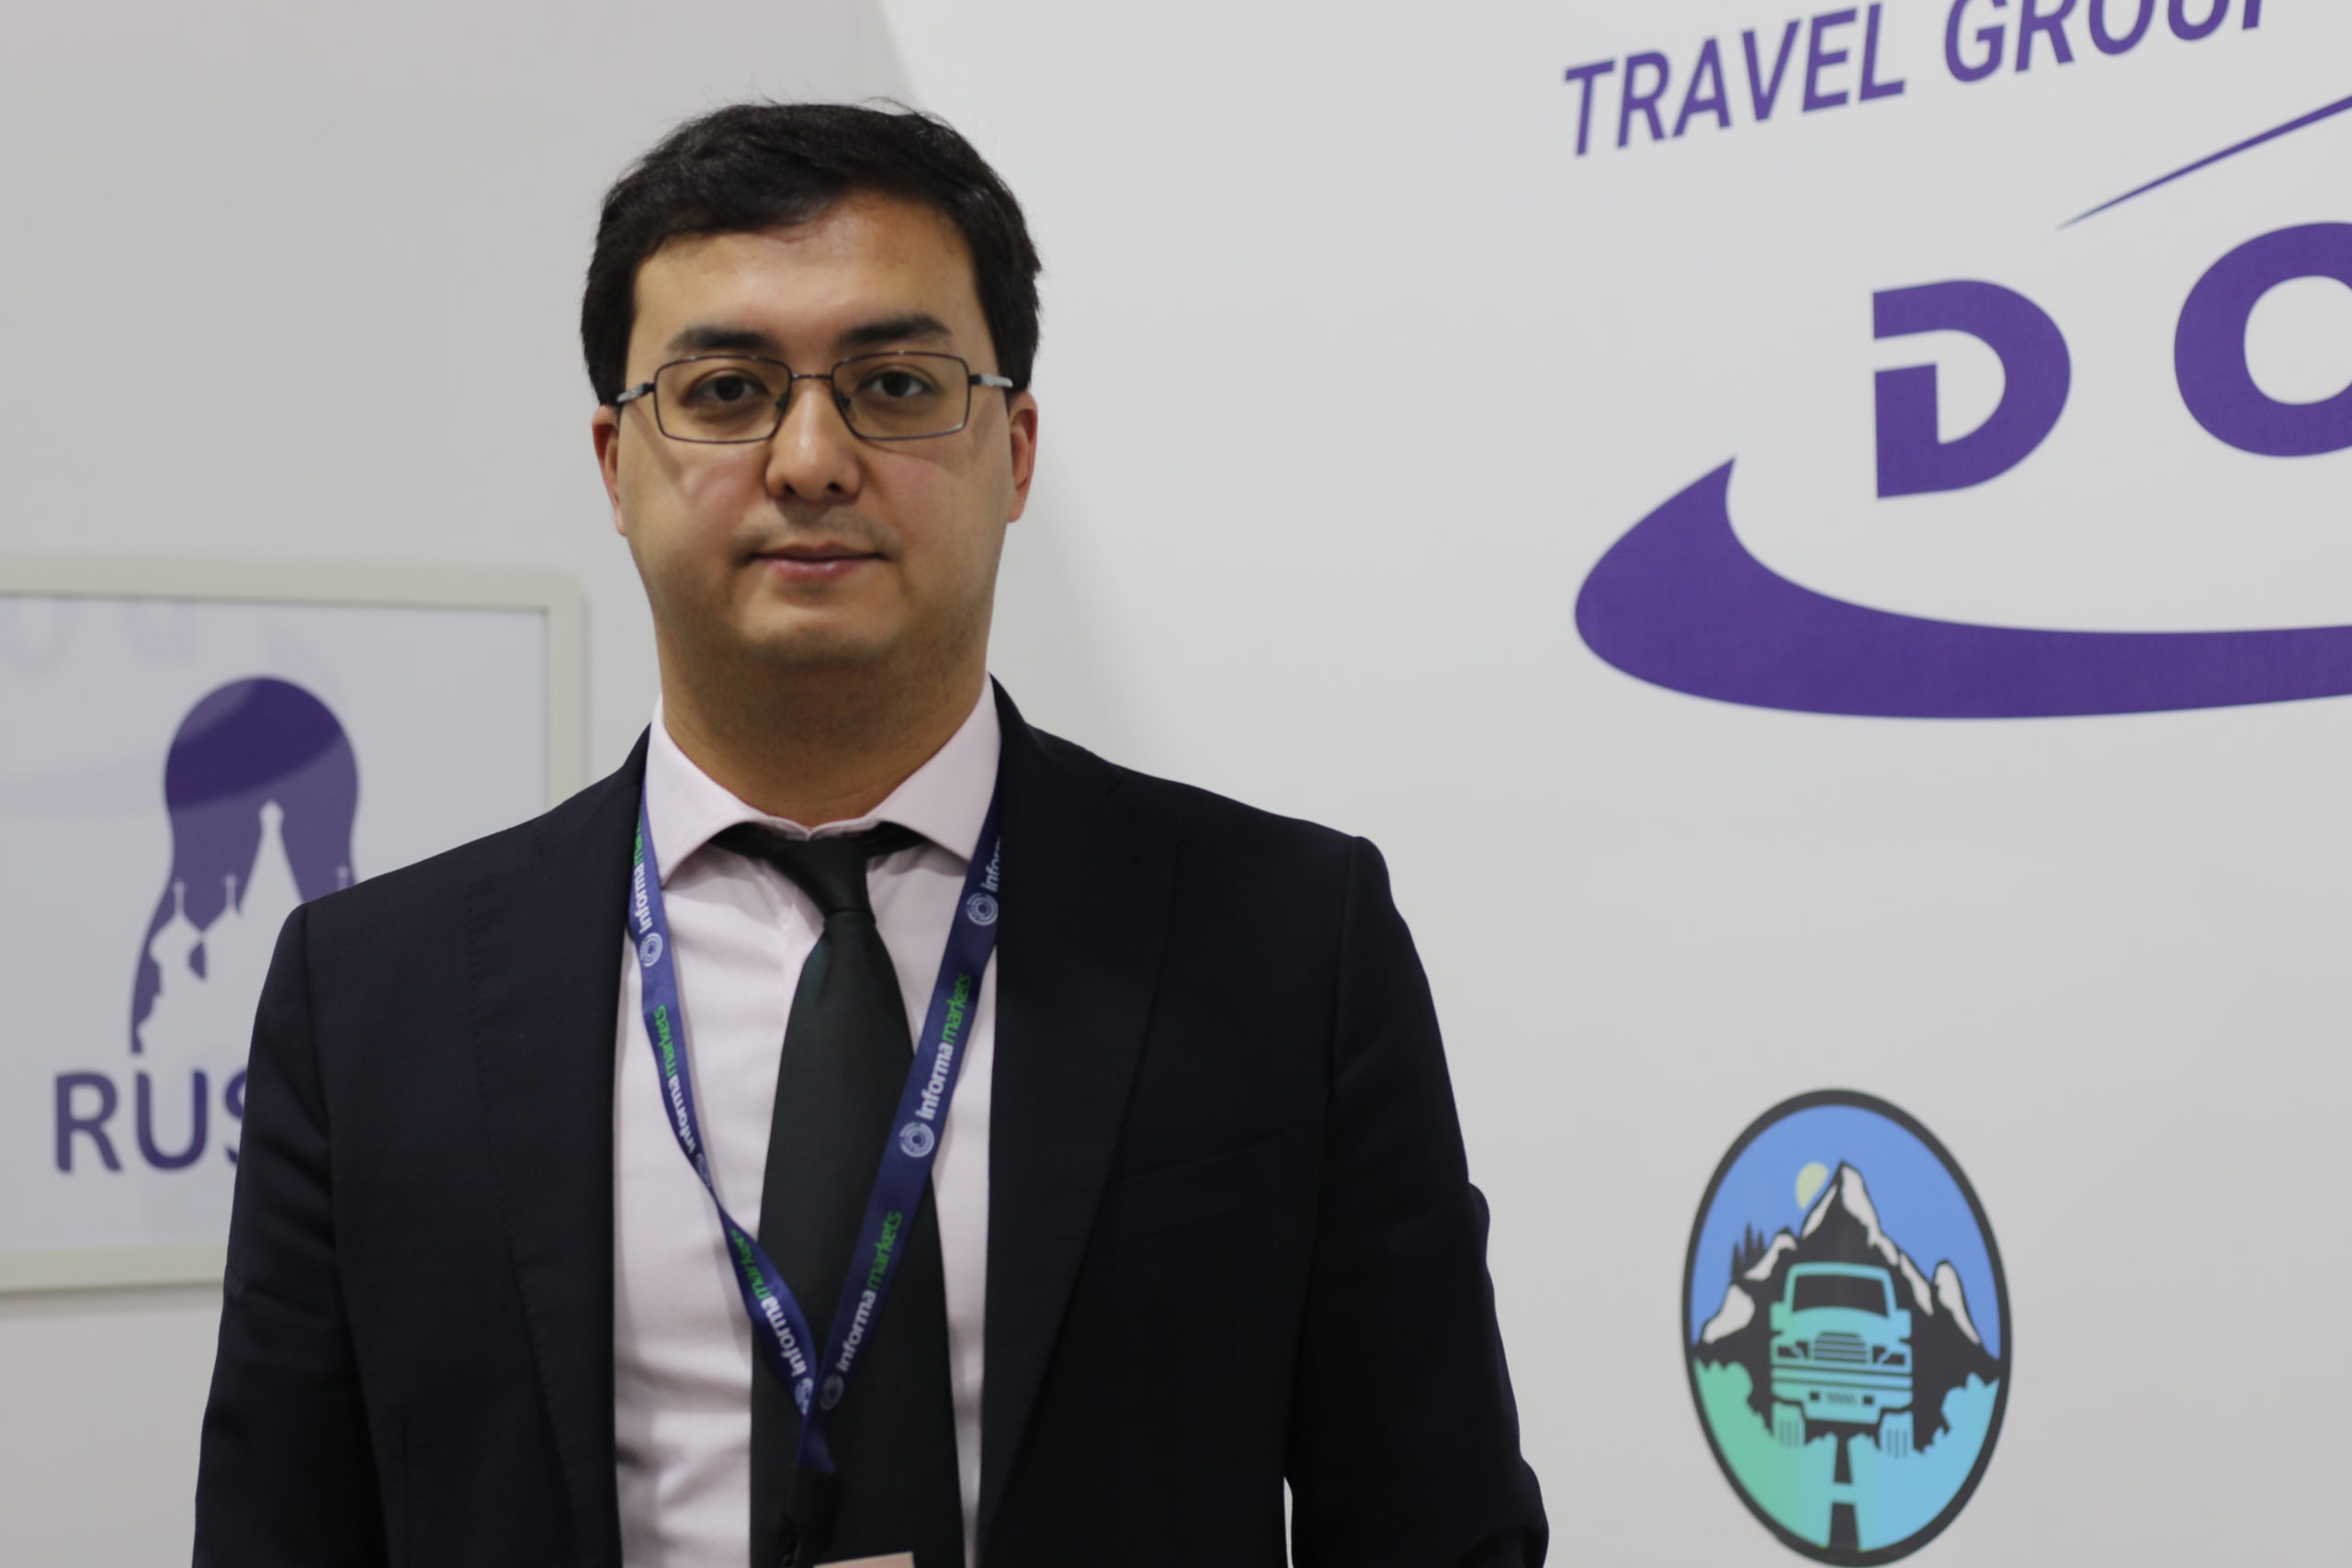 Interview with Timur Rasulev, Dolores Travel Group